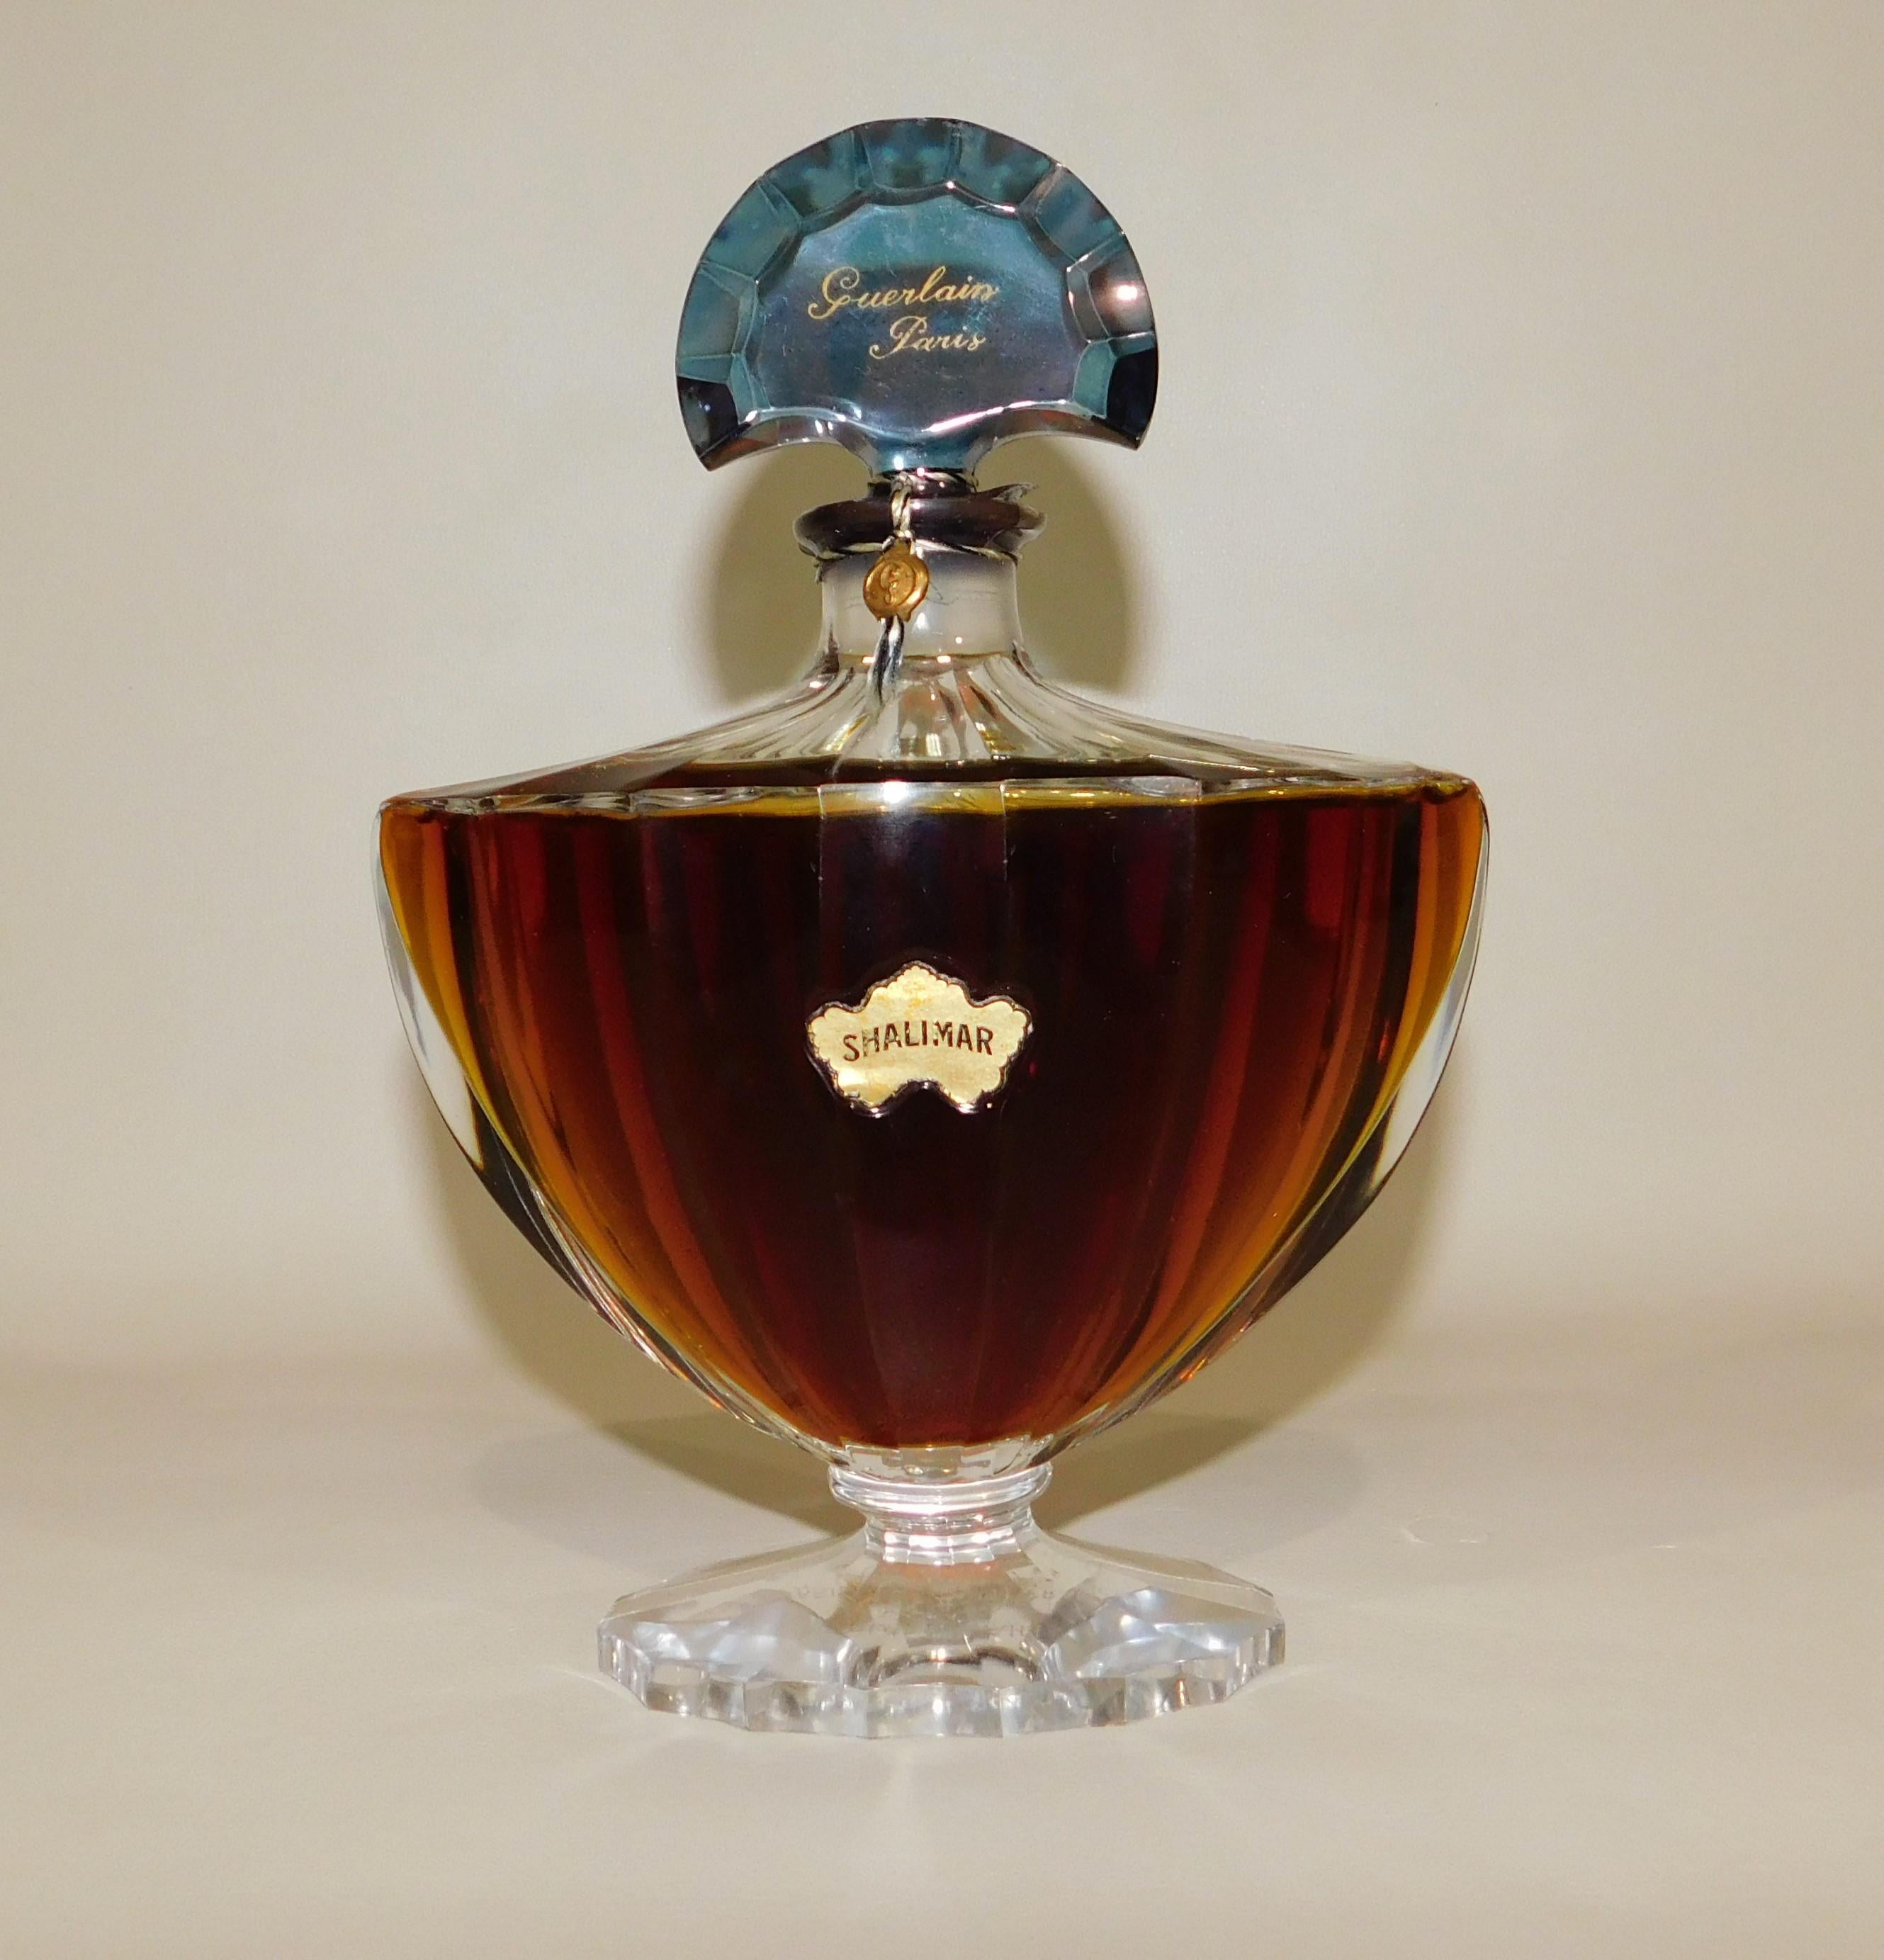 Vintage circa 1920s sealed golden amber Shalimar by Guerlain baccarat perfume bottle from Paris, France.

Flacon Chauve Souris (The Bat), circa 1924
Urn shaped flacon designed by Raymond Guerlain and produced by Baccarat to hold only the extract